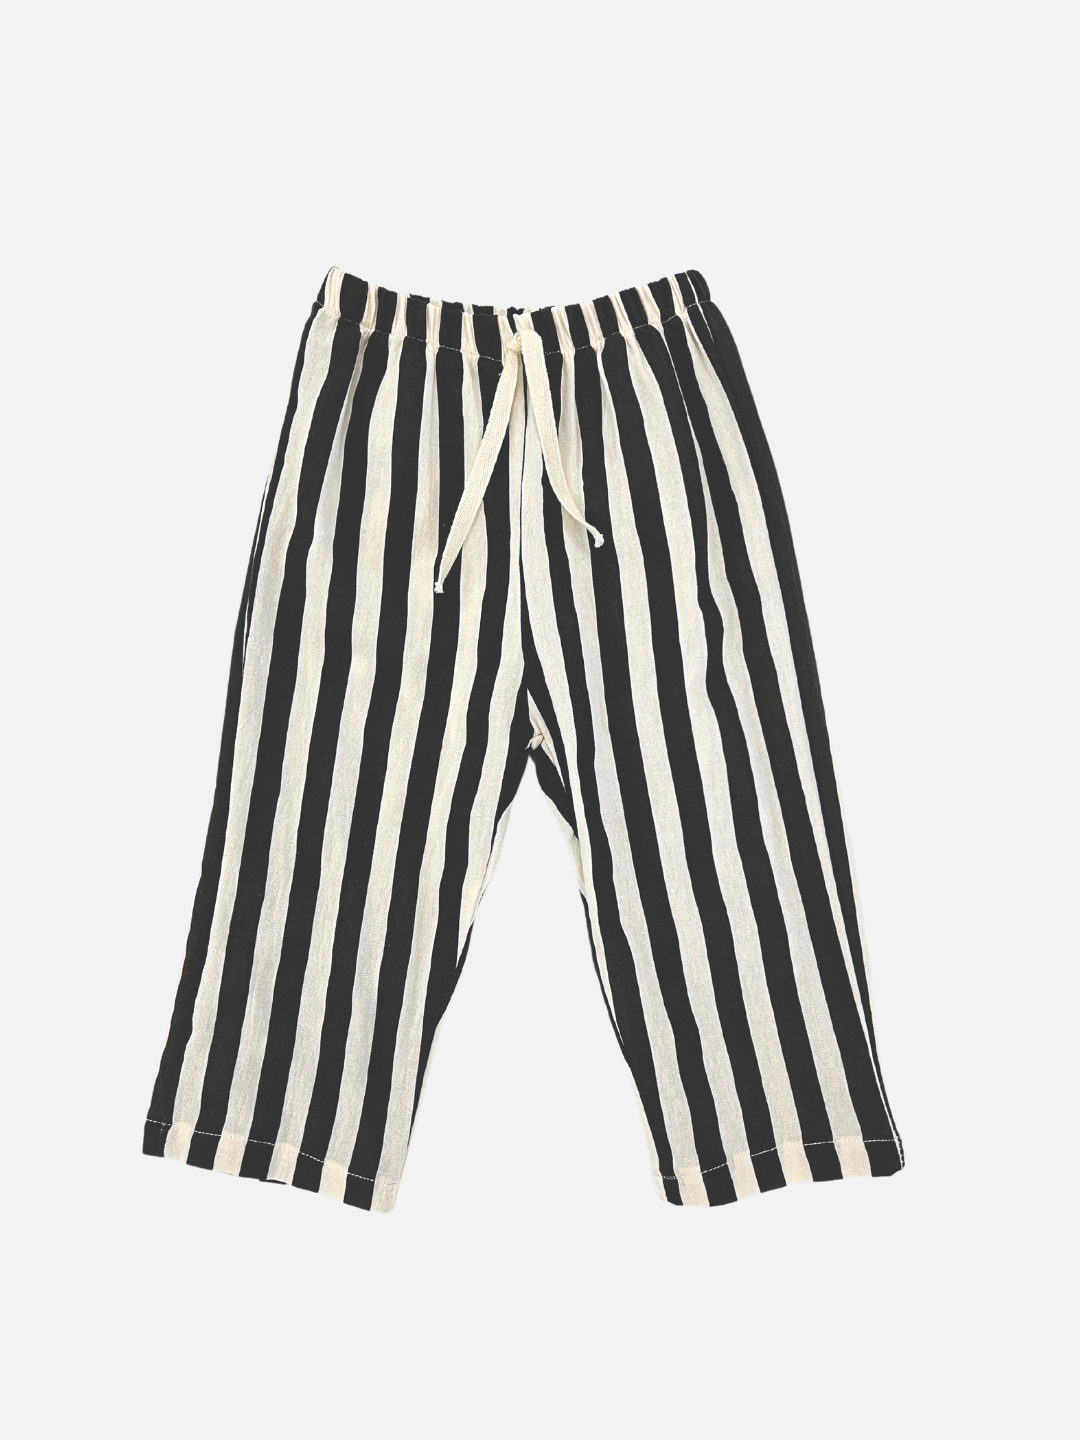 Front view of the kid's striped pants in black stripe